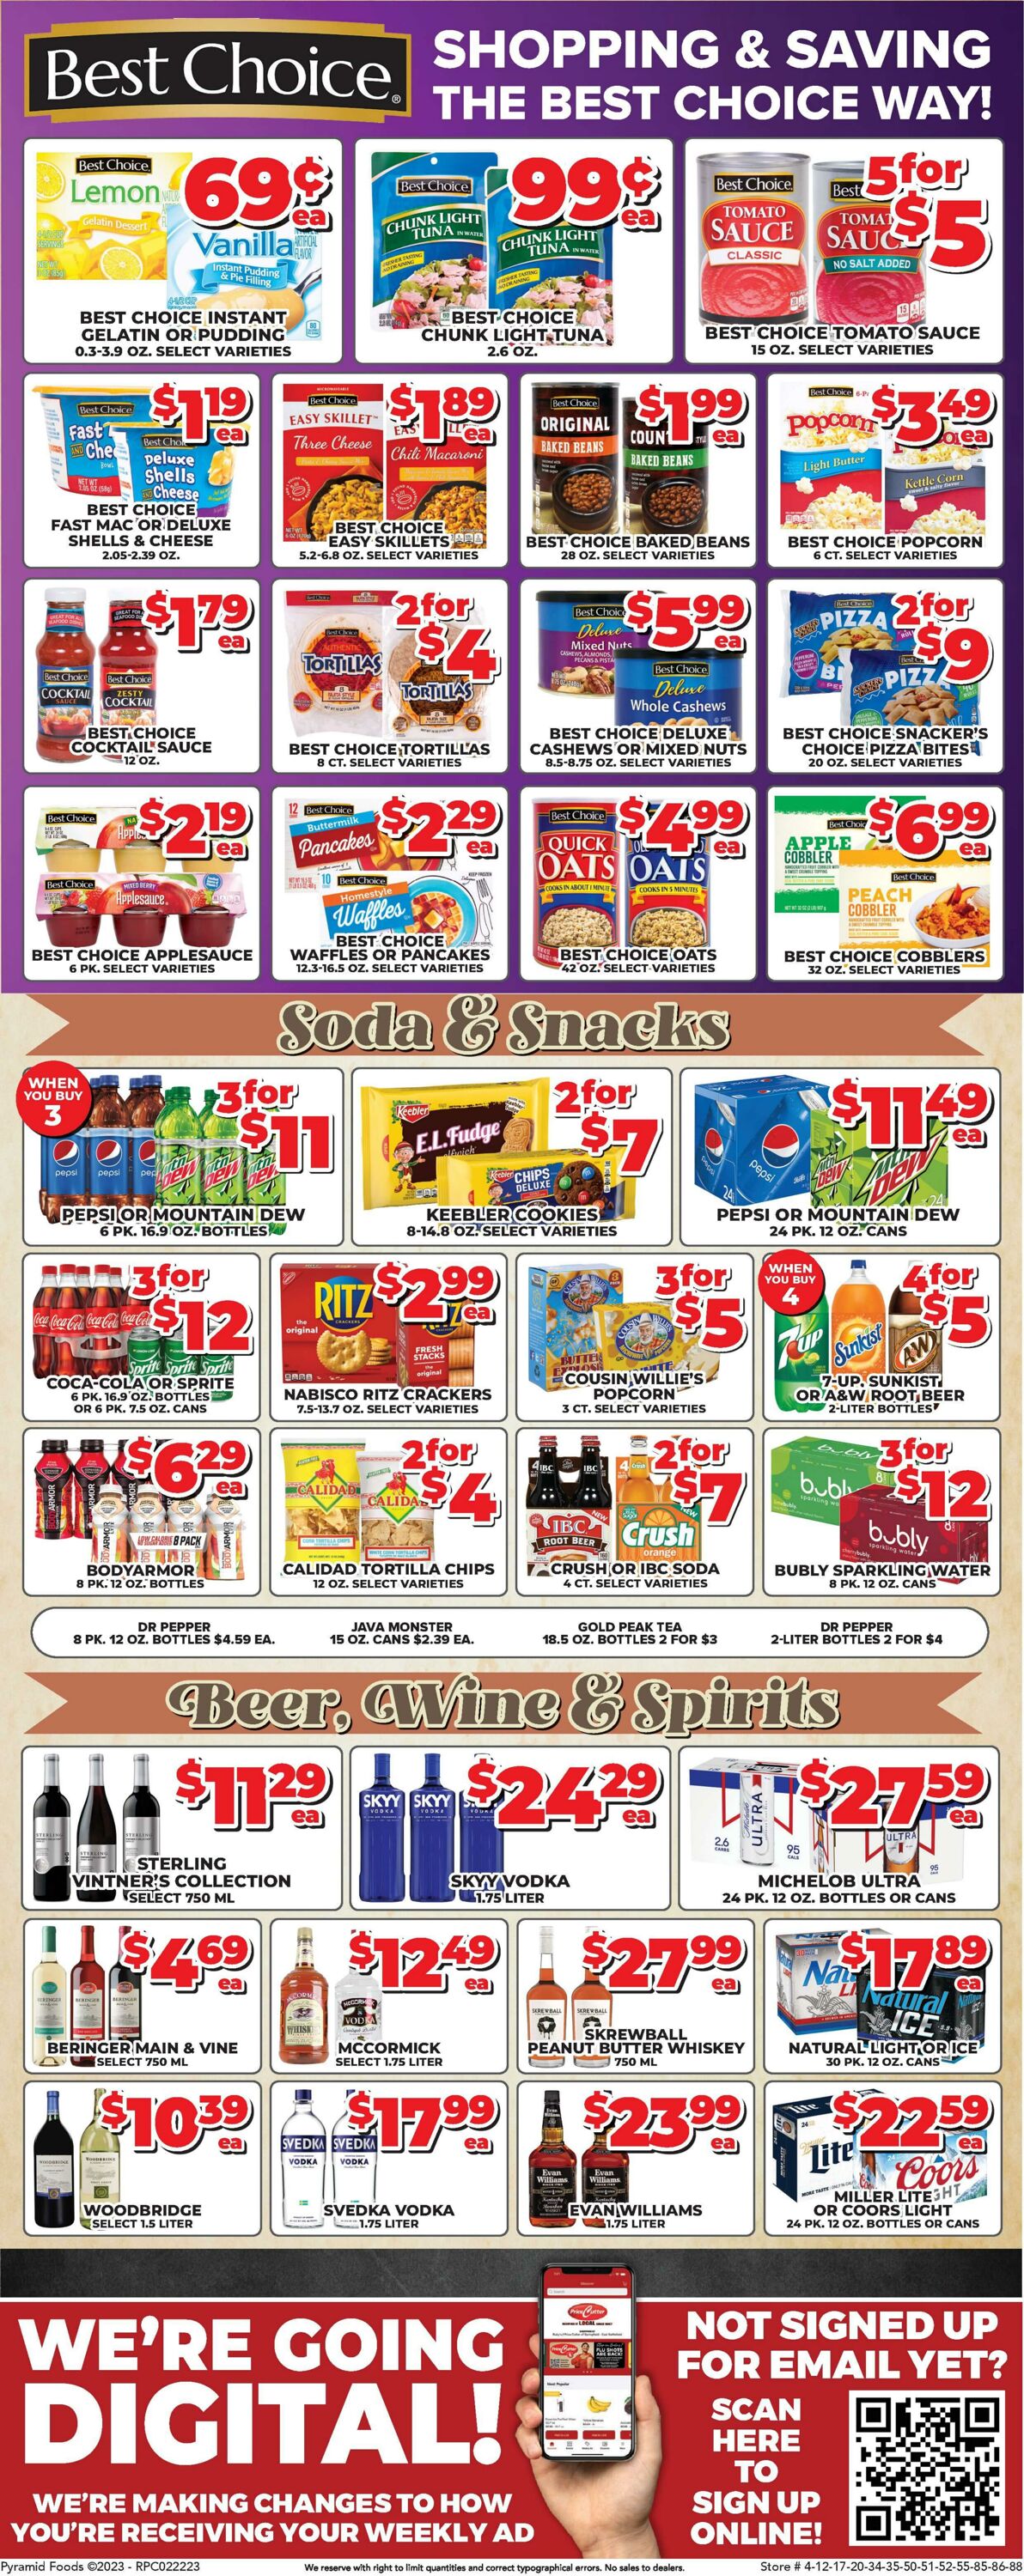 Weekly ad Price Cutter 02/22/2023 - 02/28/2023